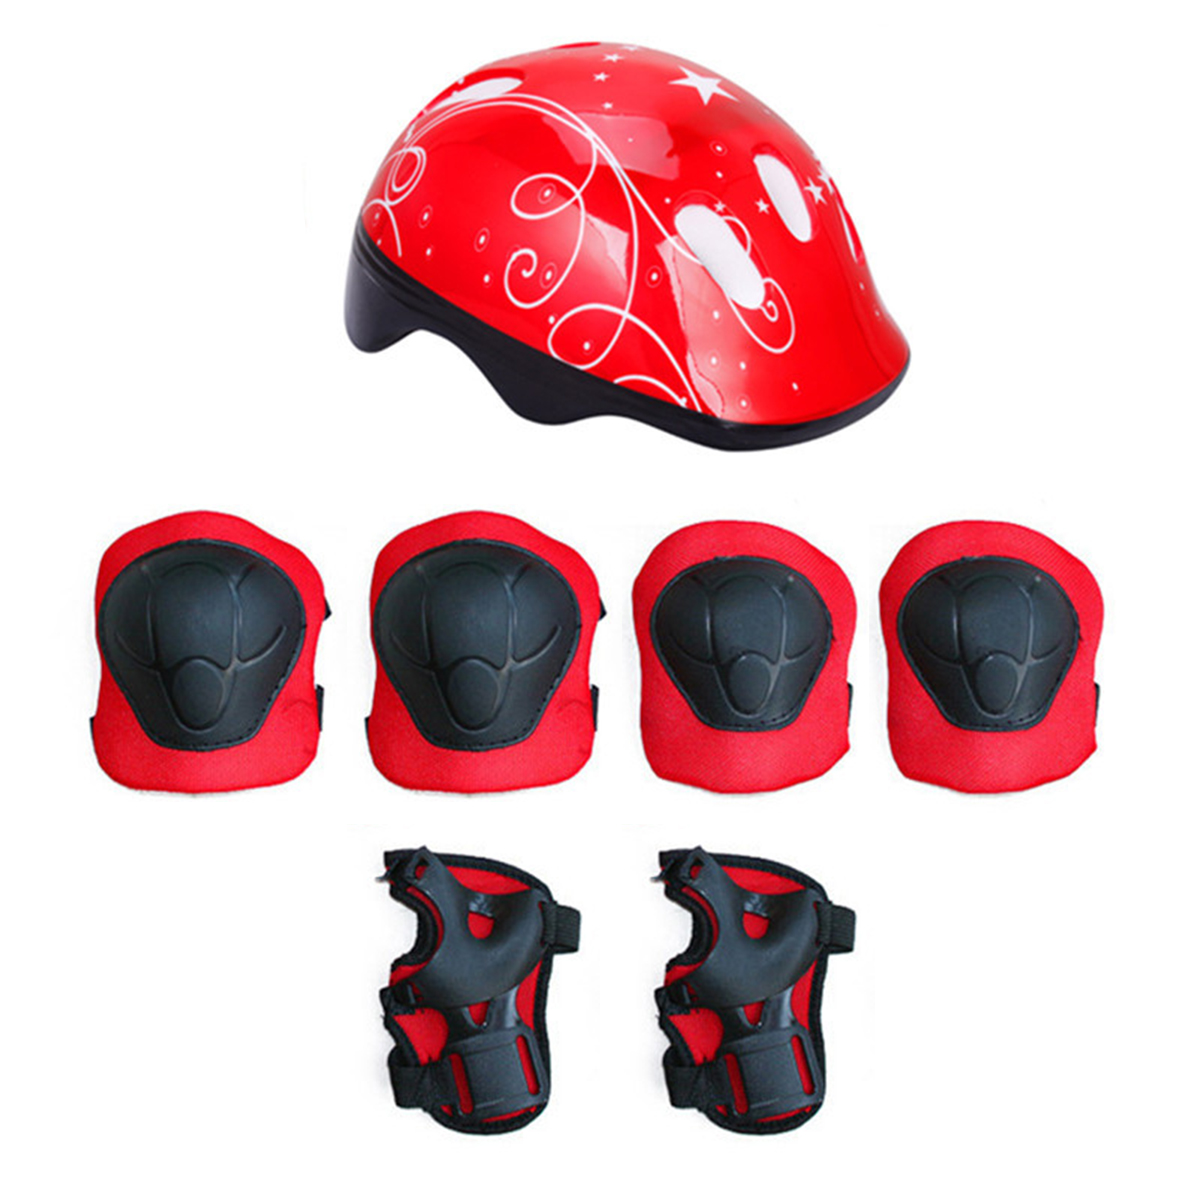 7-IN-1-Kidss-Balance-Bike-Helmet-Kits-With-Protect-Knee-Wrist-Elbow-Pads-Roller-Skating-Protective-E-1734300-5